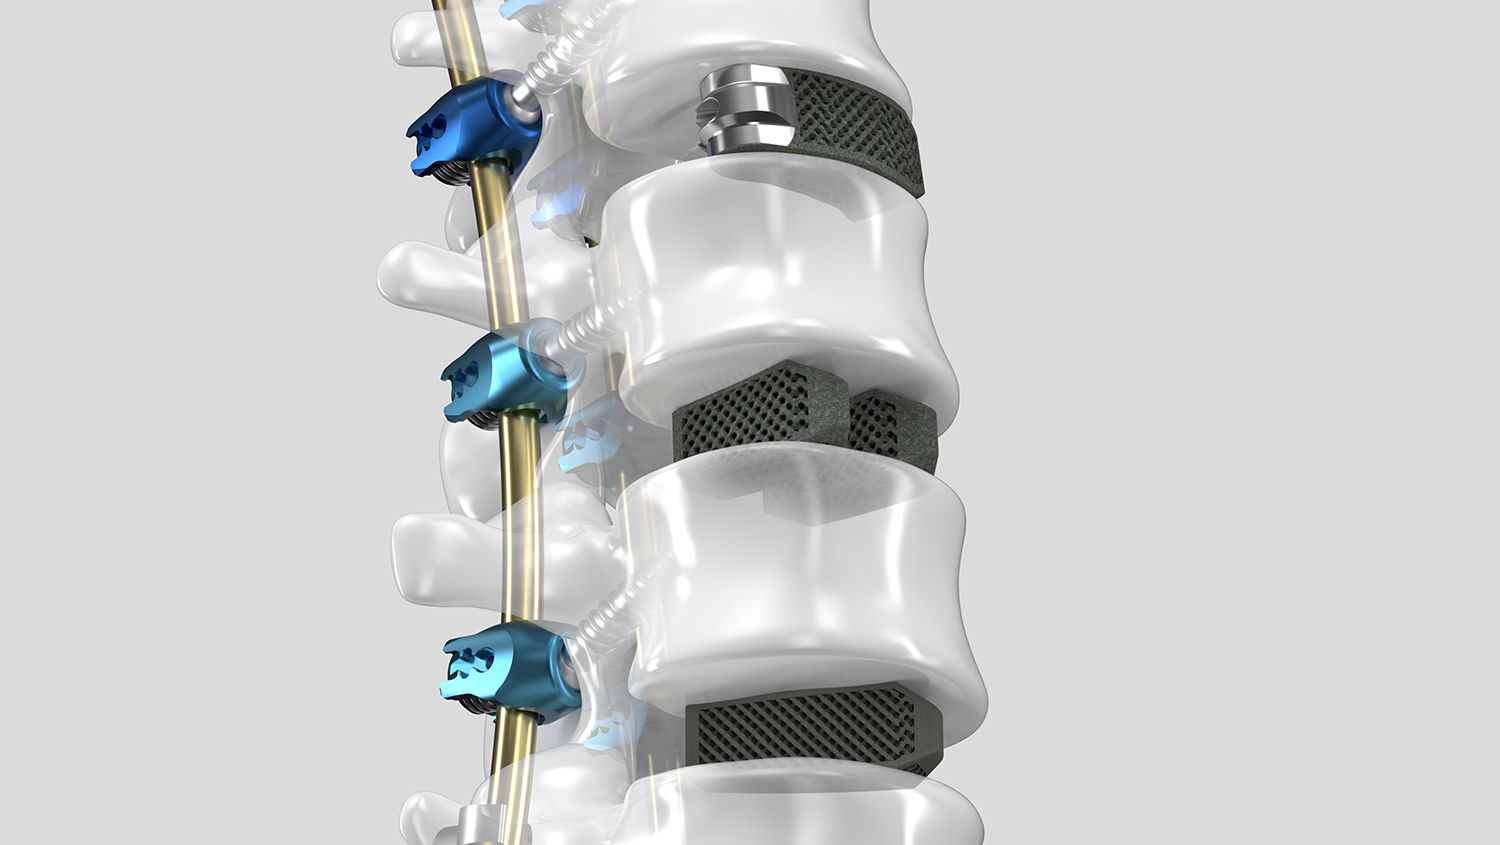 Ennovate® Thoracolumbar & Sacropelvic with AESCULAP® 3D Interbody fusion devices